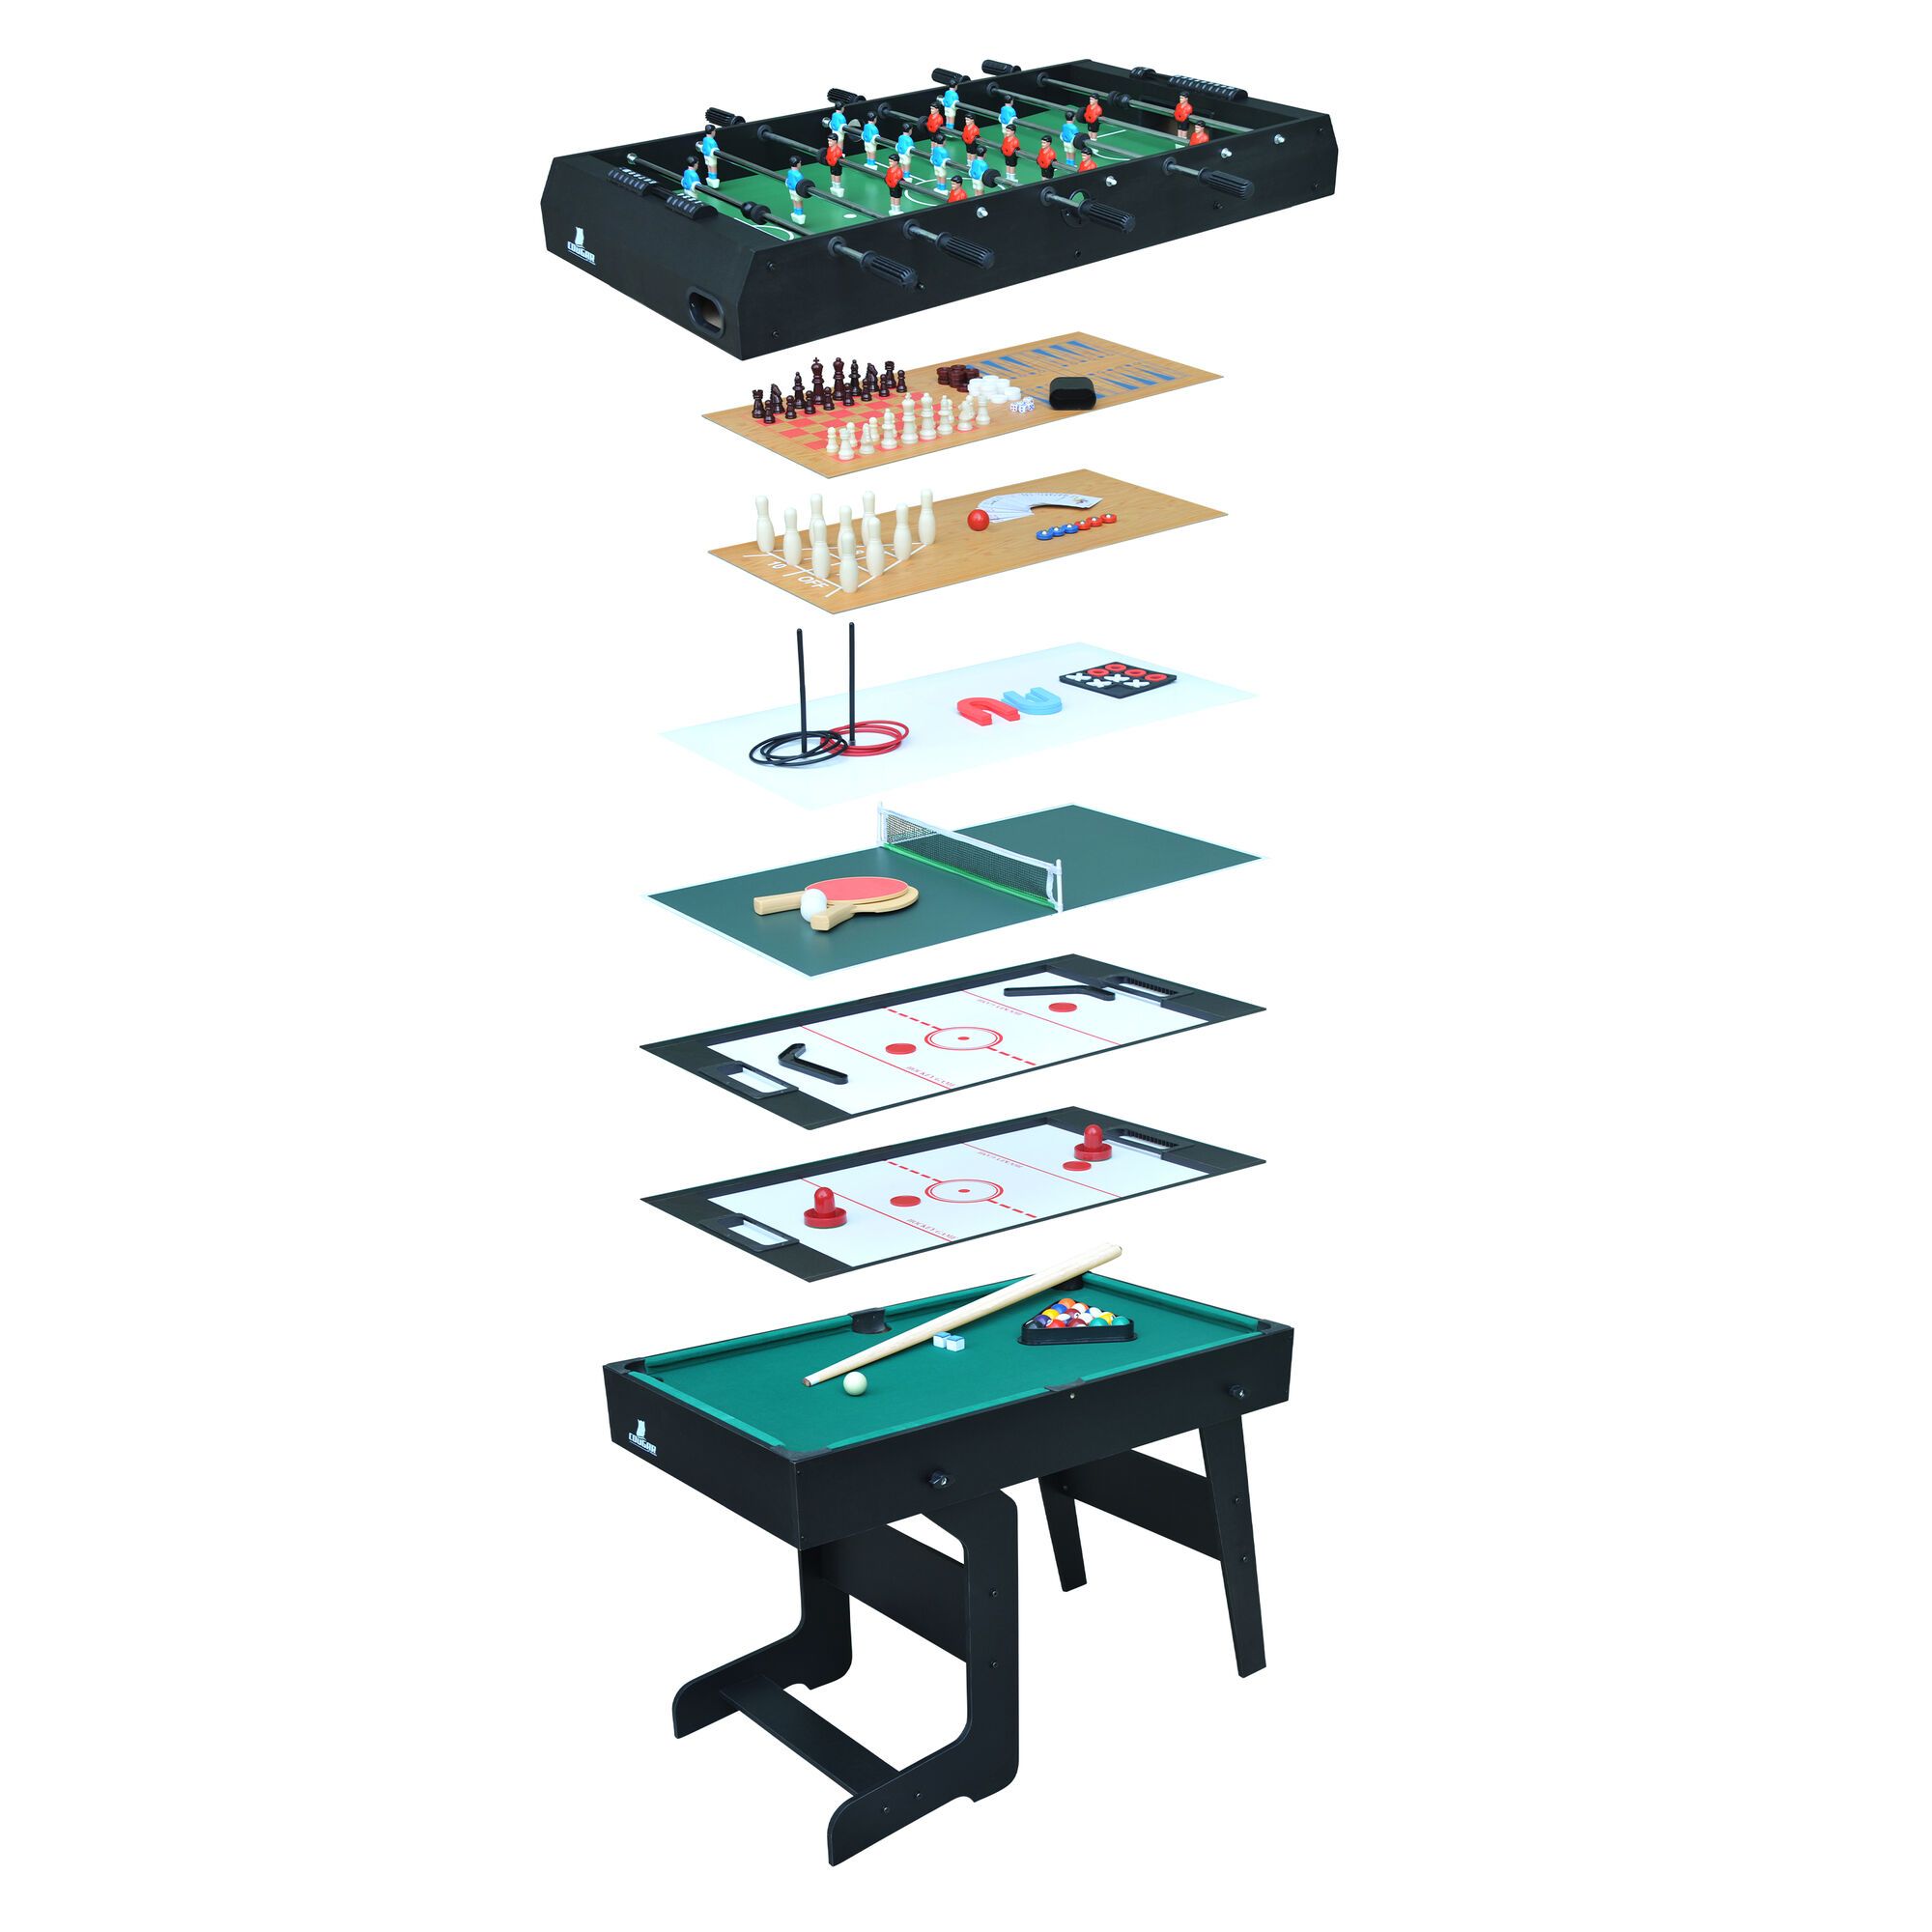 Cougar All-in-One 16-in-1 Table multi jeux pliable Noir